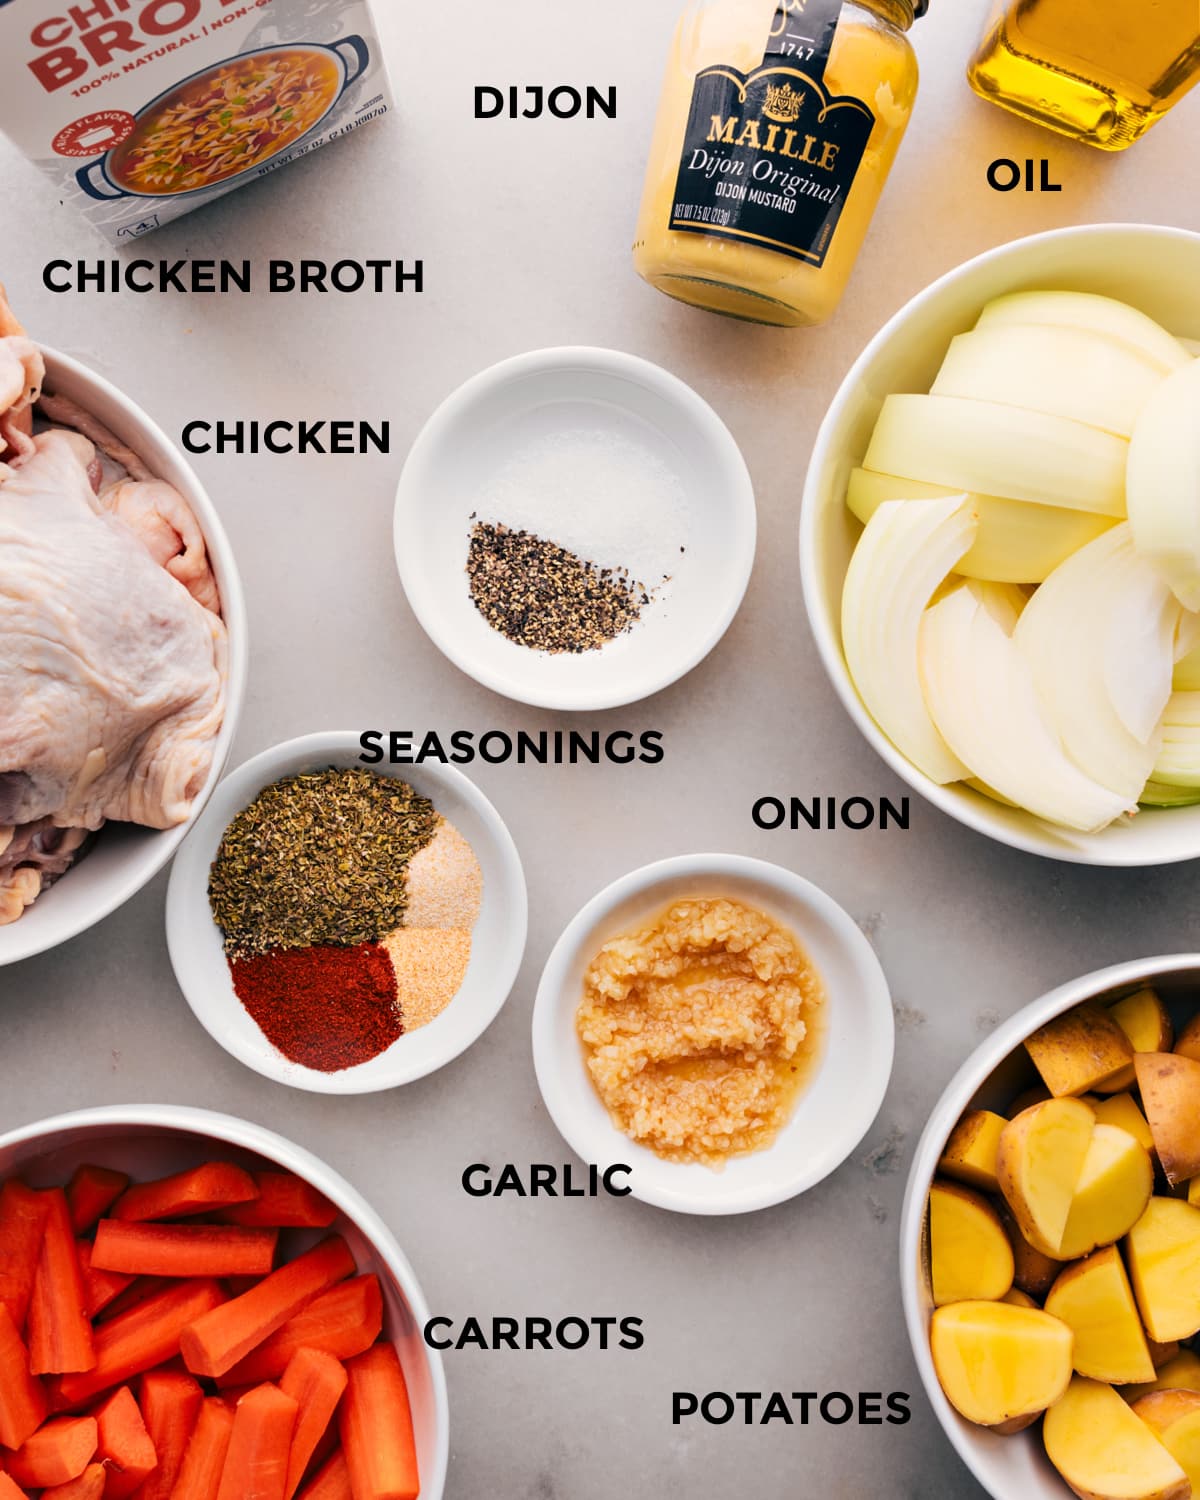 All the ingredients in this recipe laid out for easy prep.